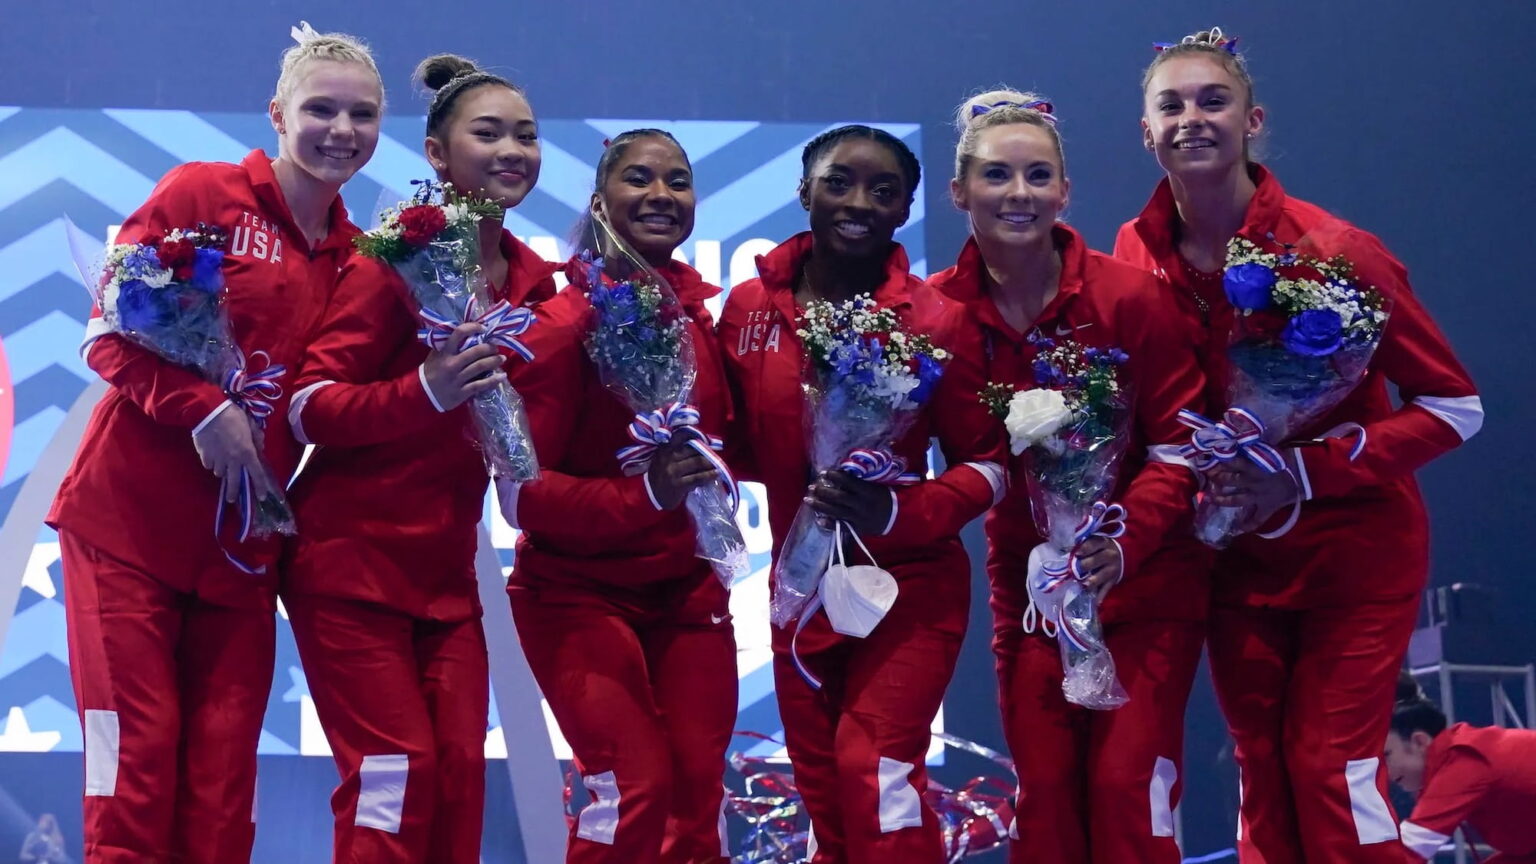 There's a new gold medalist in town – and it's not who you think it is. Find out who just won the gold in the 2021 Olympics gymnastics all-around.